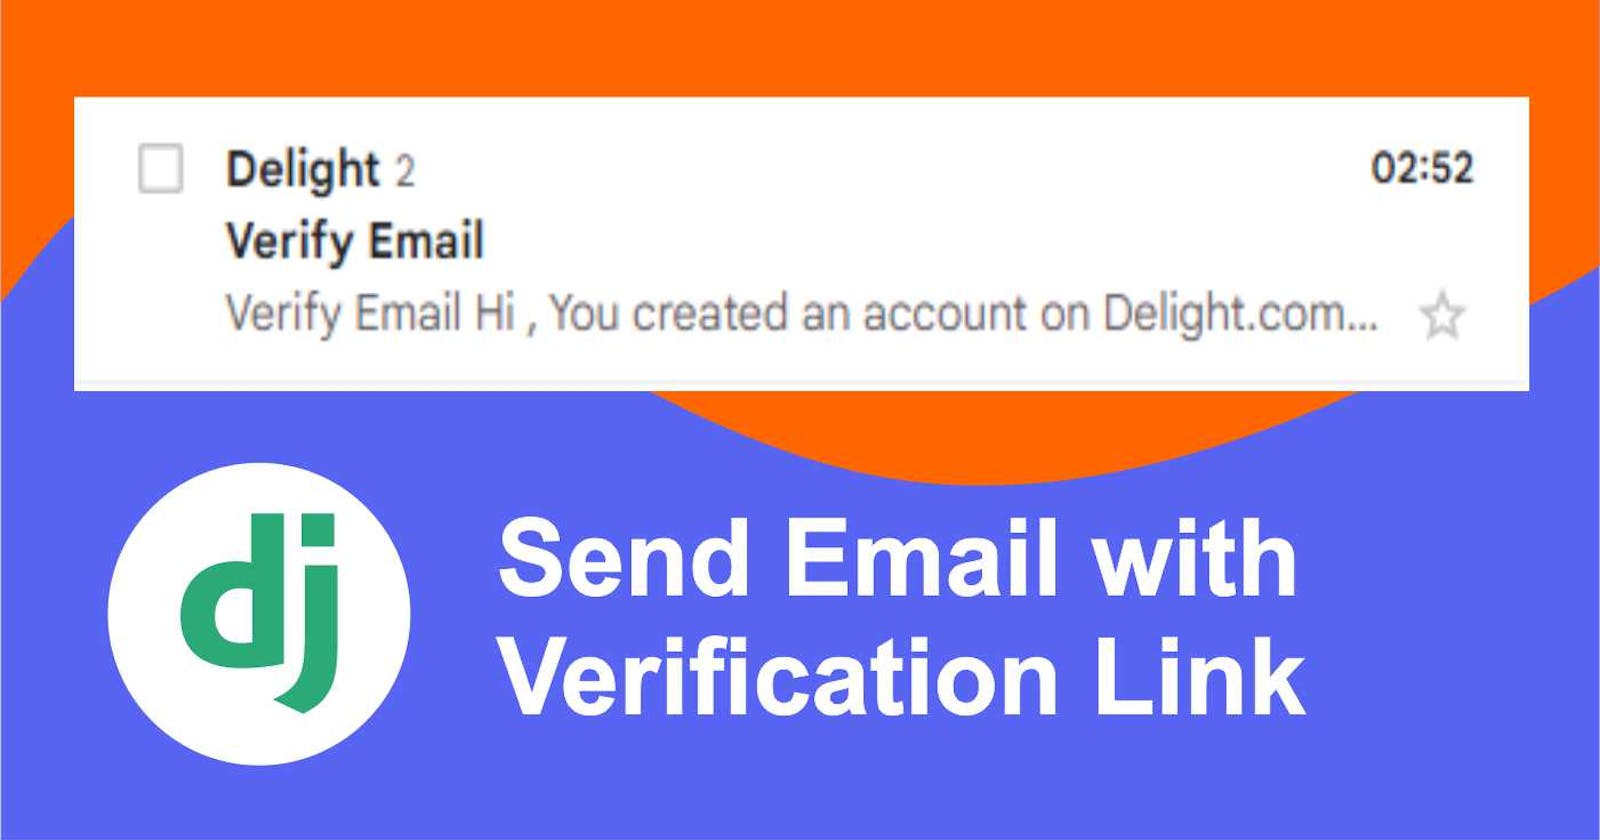 How to Send Email with Verification Link in Django